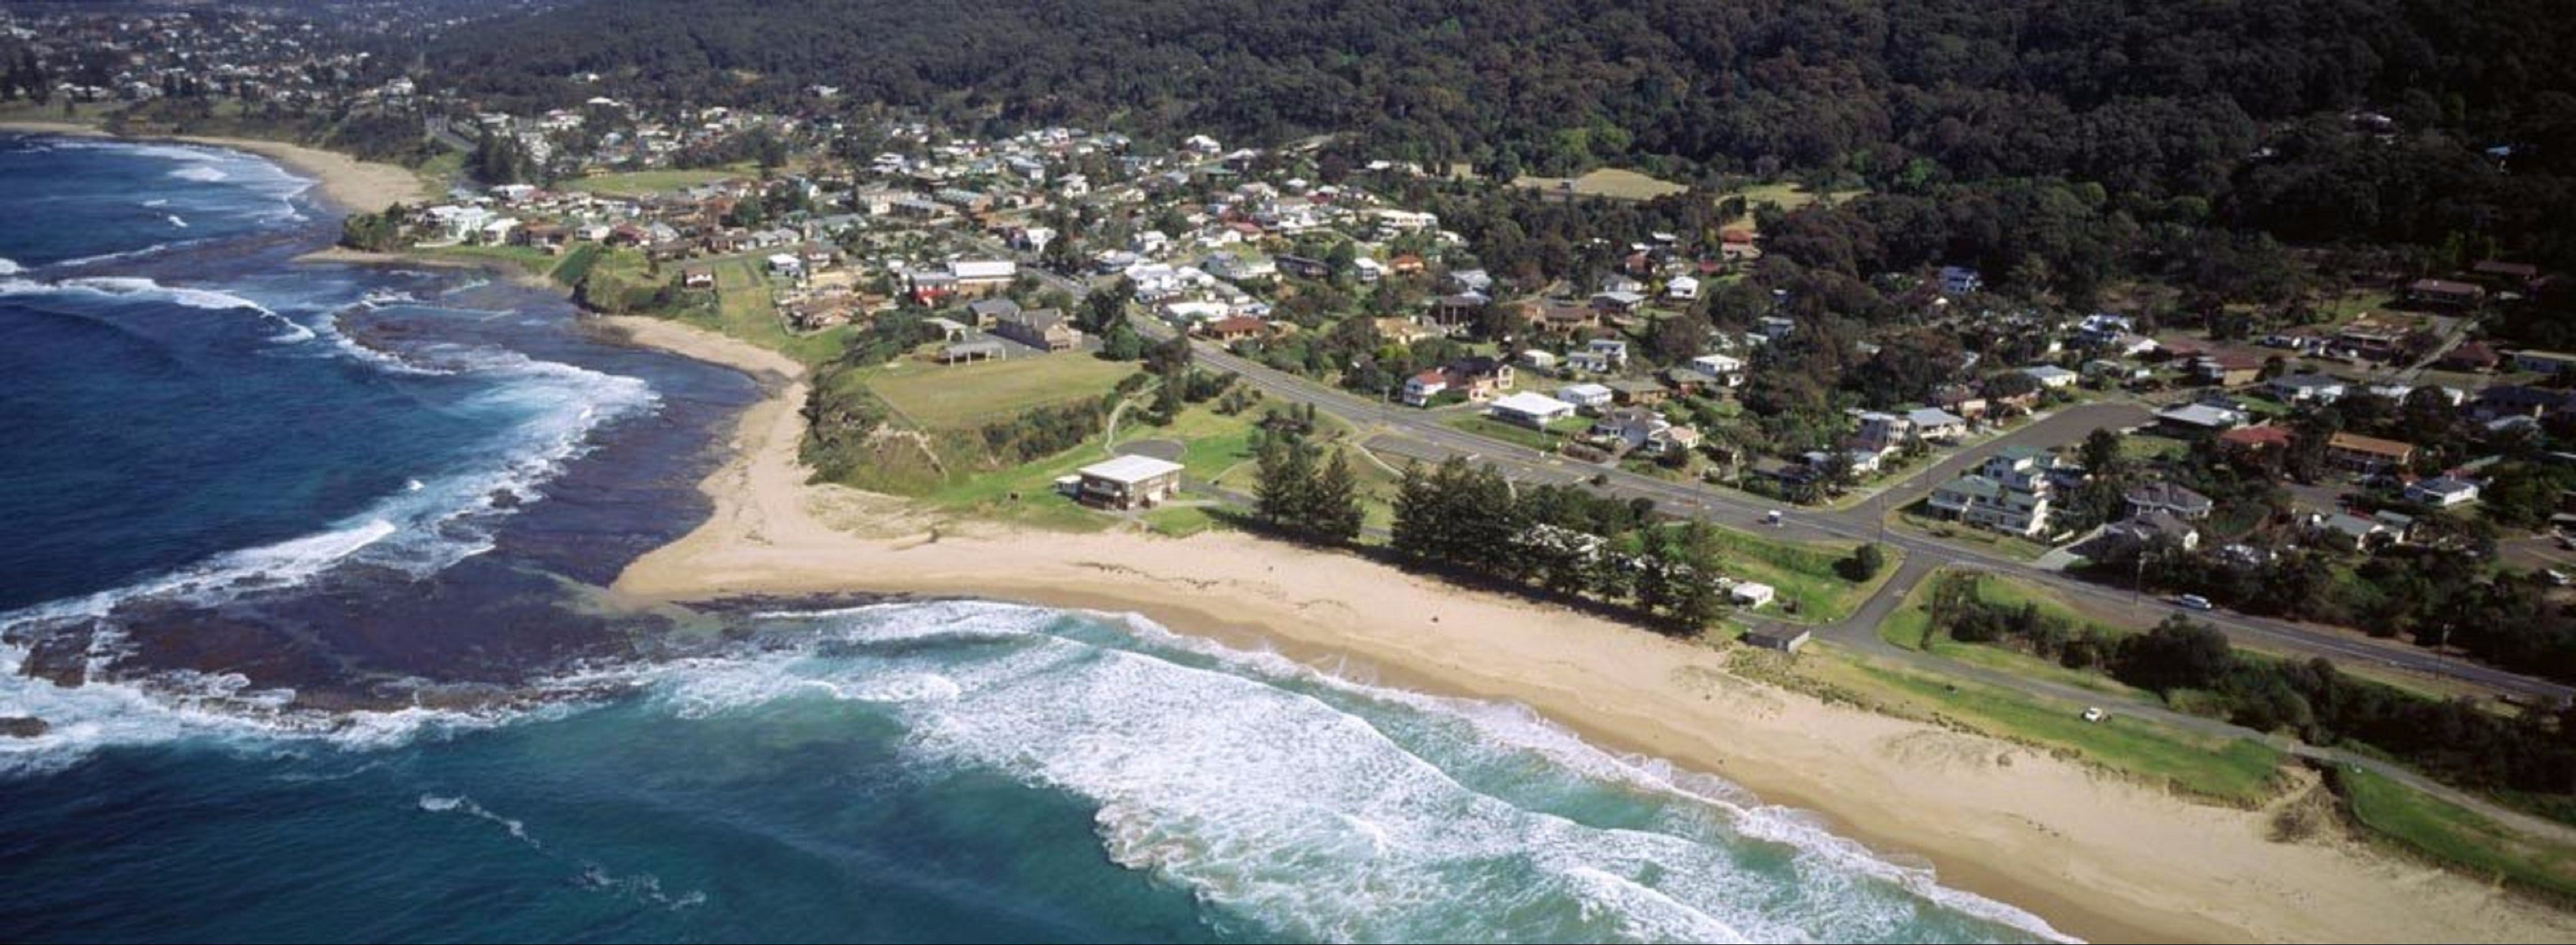 Coledale Beach Camping Reserve - Accommodation Bookings 0